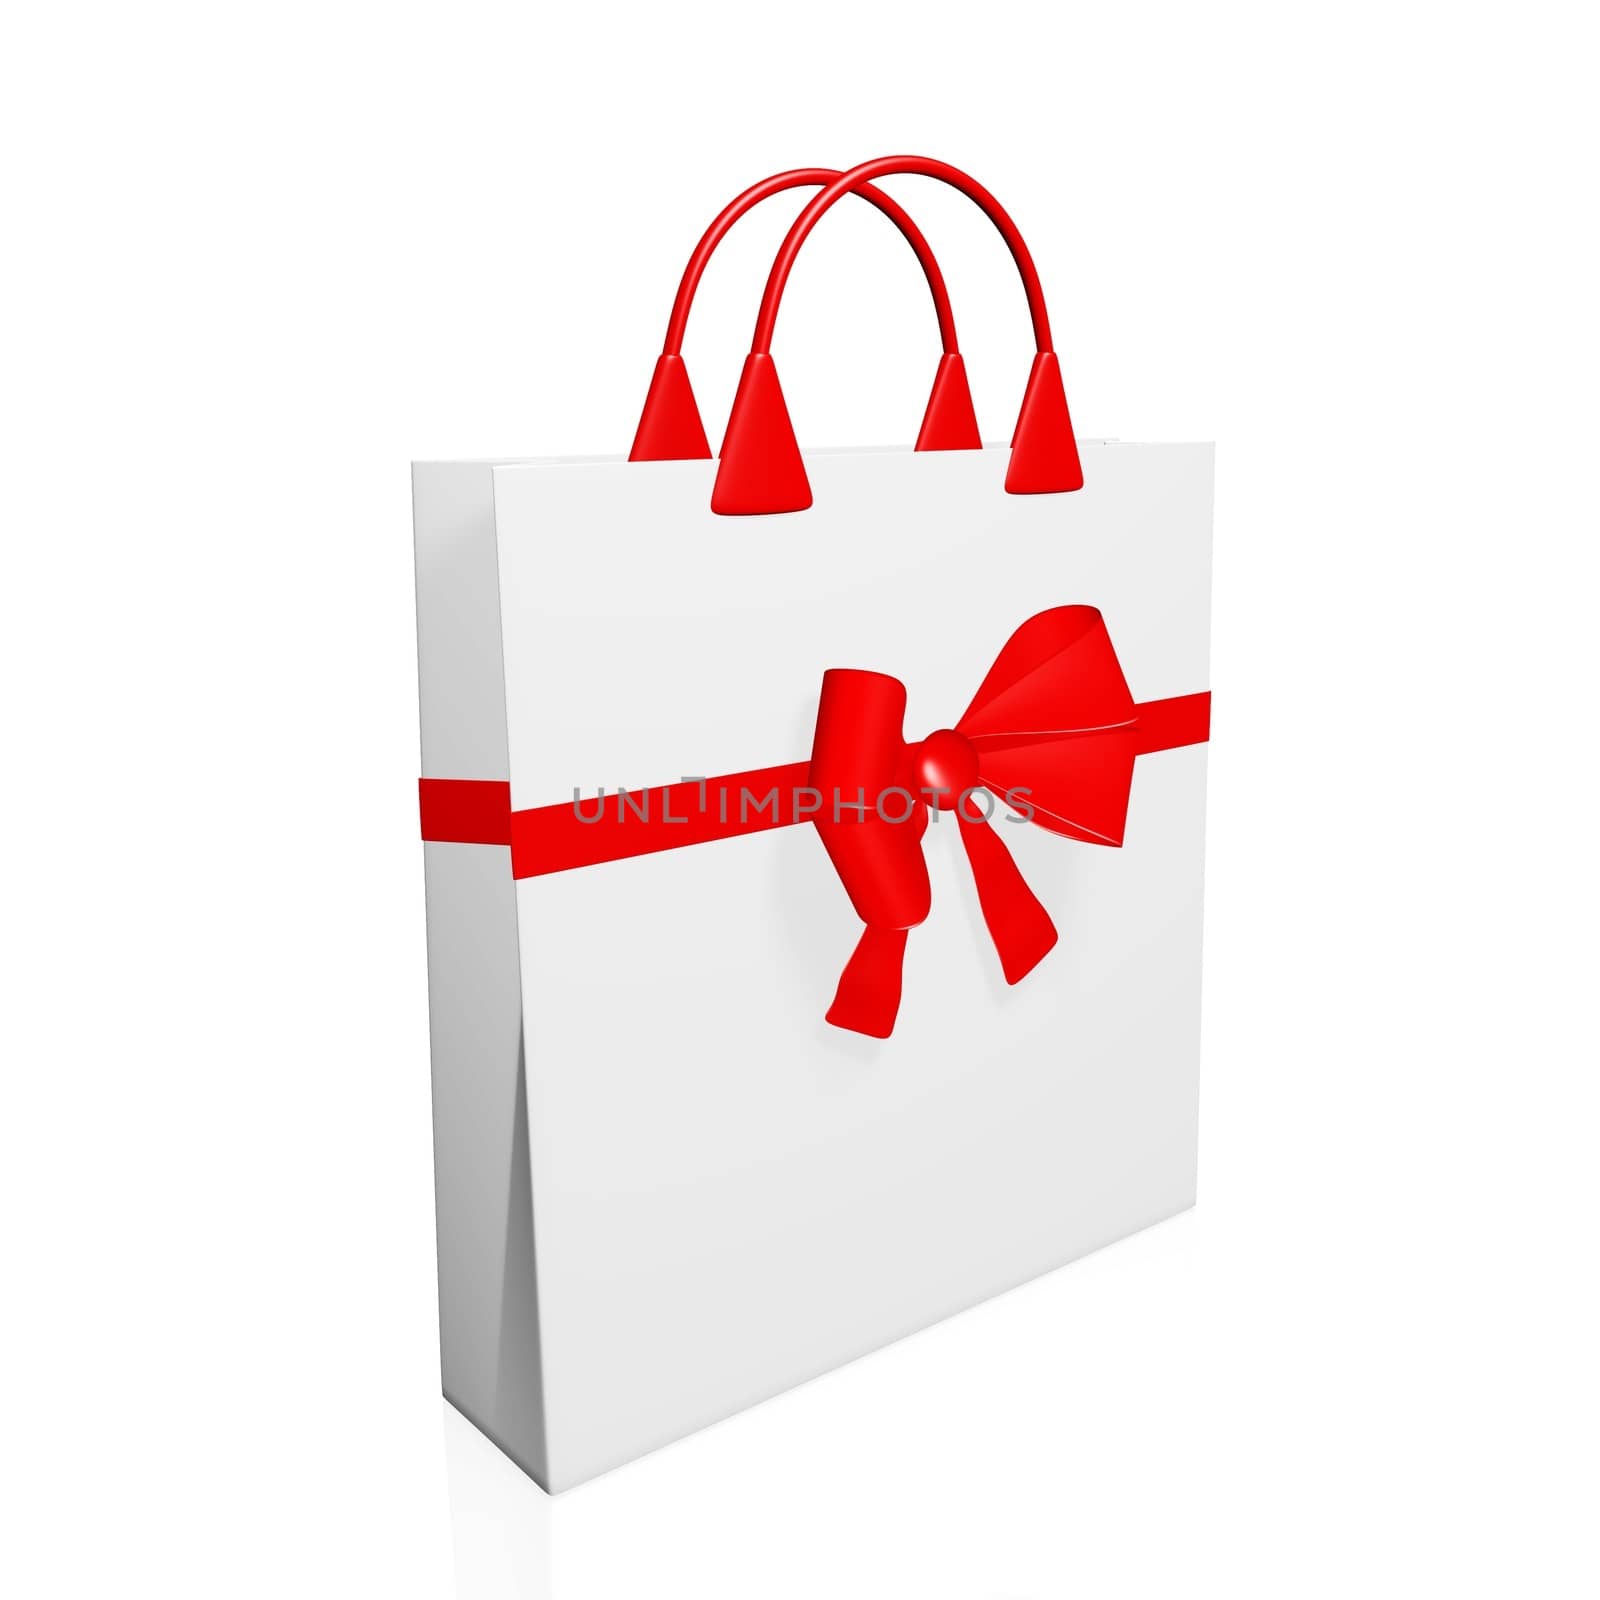 3D Festive Shopping Bag with Red Bow Ribbon by RichieThakur